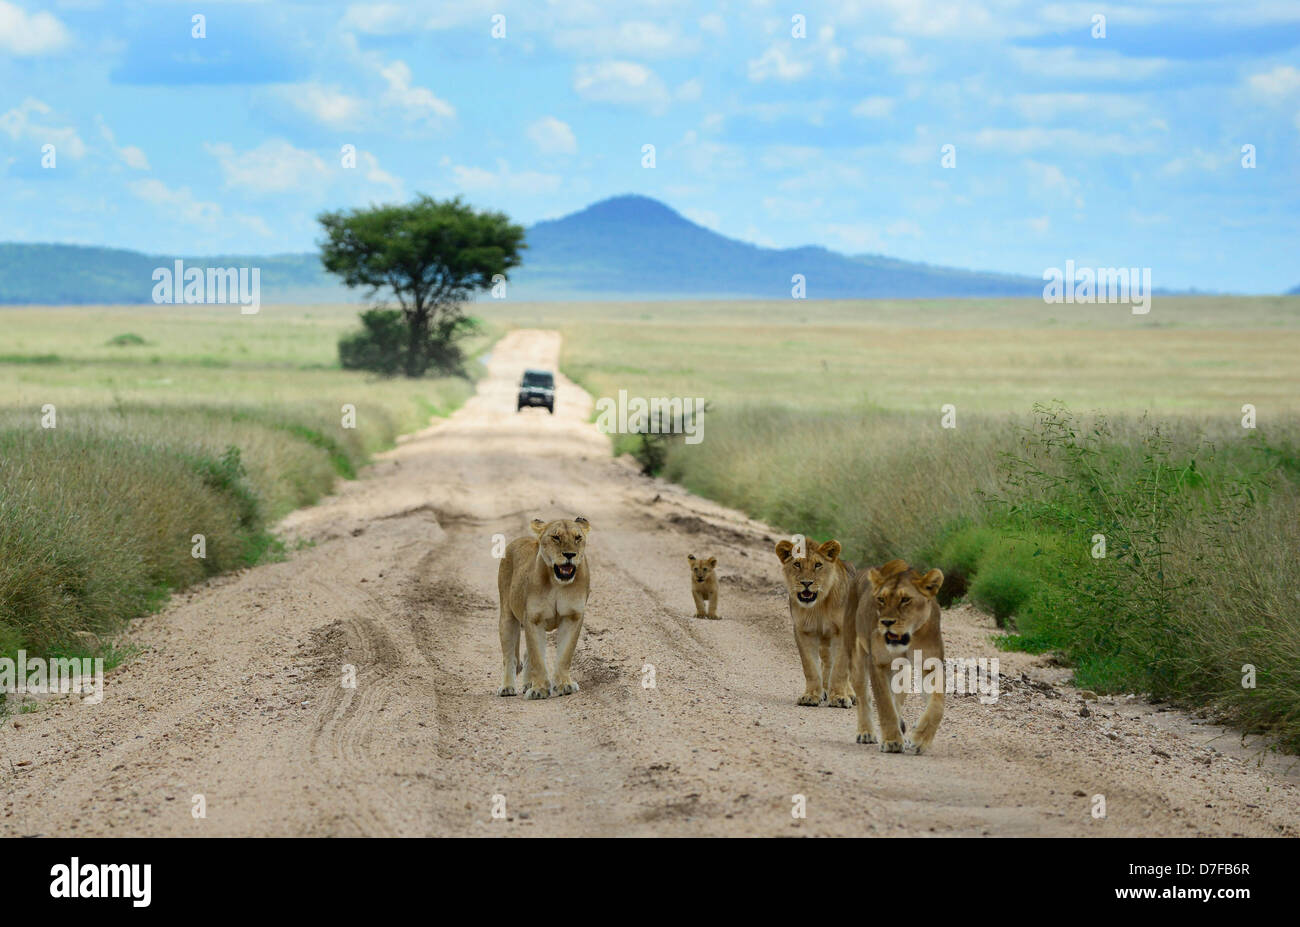 A young family of lions walking on the dirt road in Serengeti national park. Stock Photo